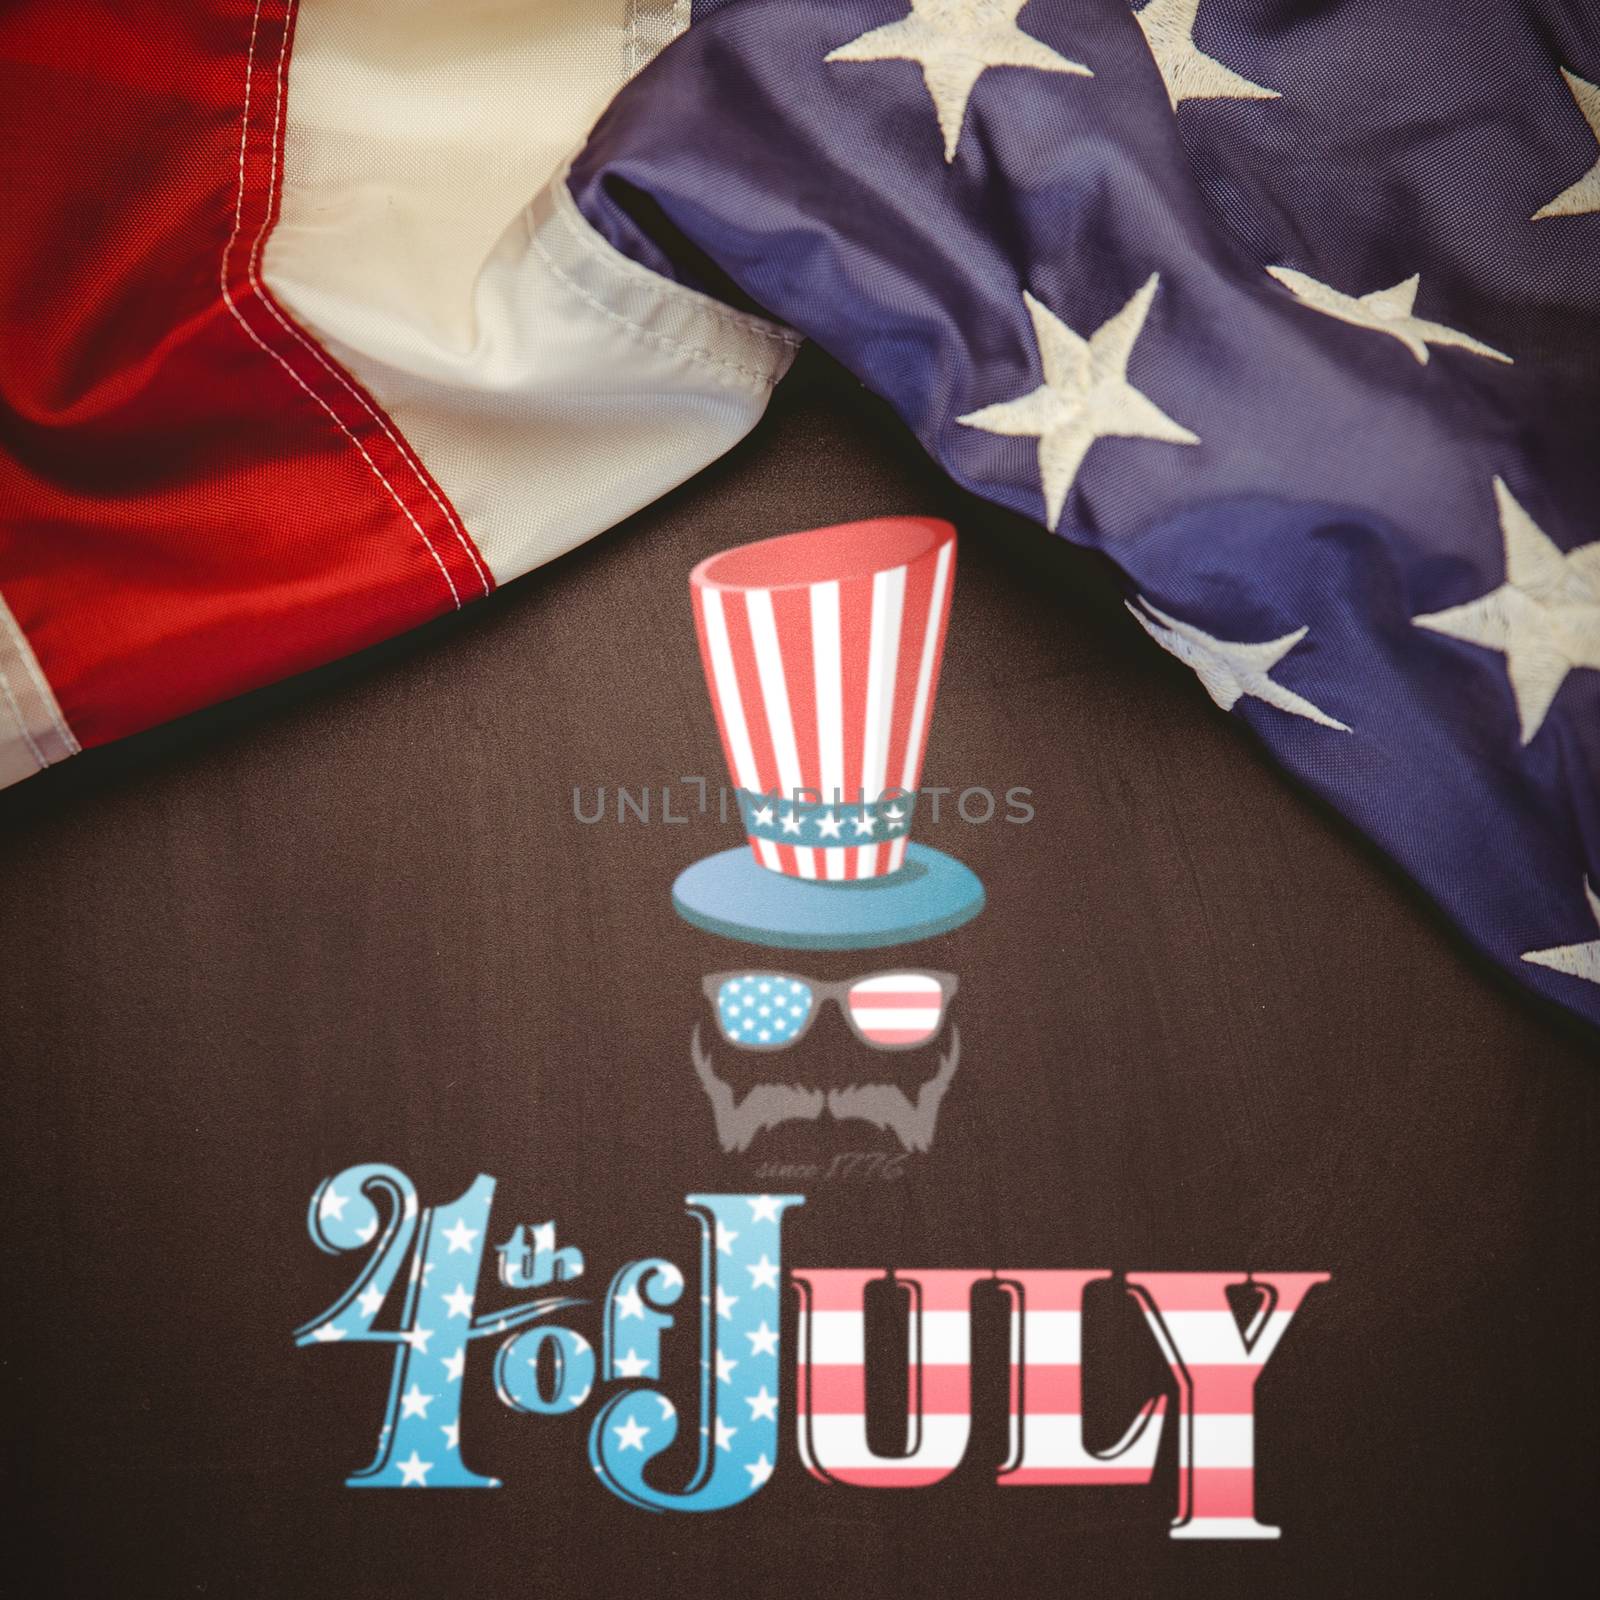 Composite image of focus on 4th july by Wavebreakmedia